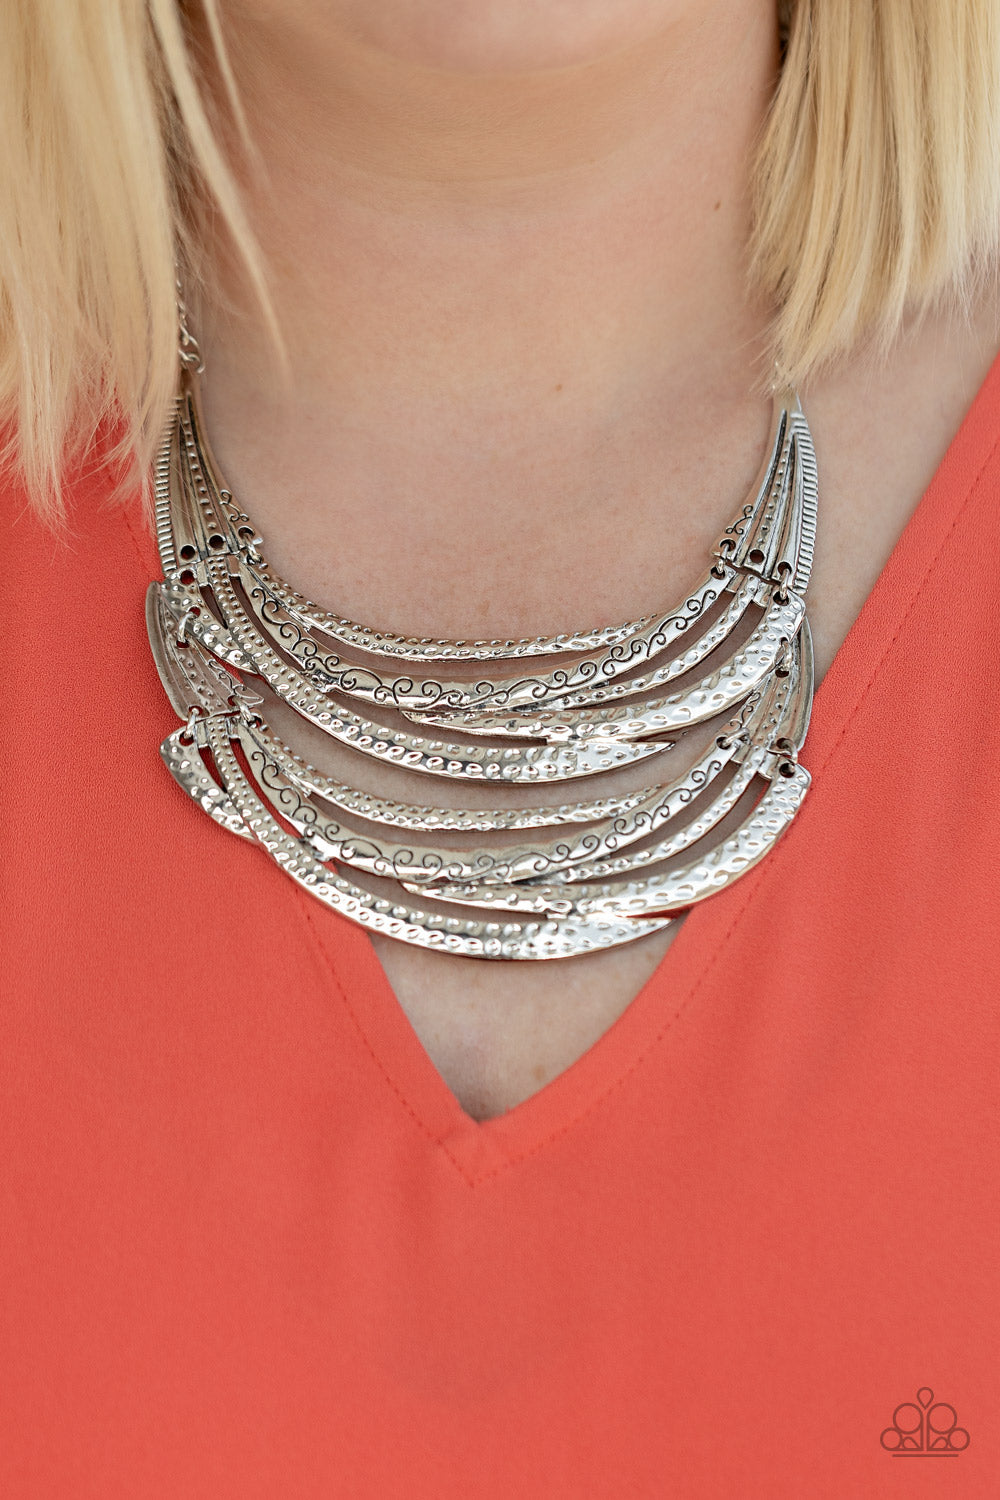 Read Between the VINES Silver Necklace - Paparazzi Accessories Stamped in sections of vine-like patterns, abstract hammered plates and overlapping silver bars link into an exaggerated pendant below the collar for a statement-making look. Features an adjustable clasp closure.  Sold as one individual necklace. Includes one pair of matching earrings.